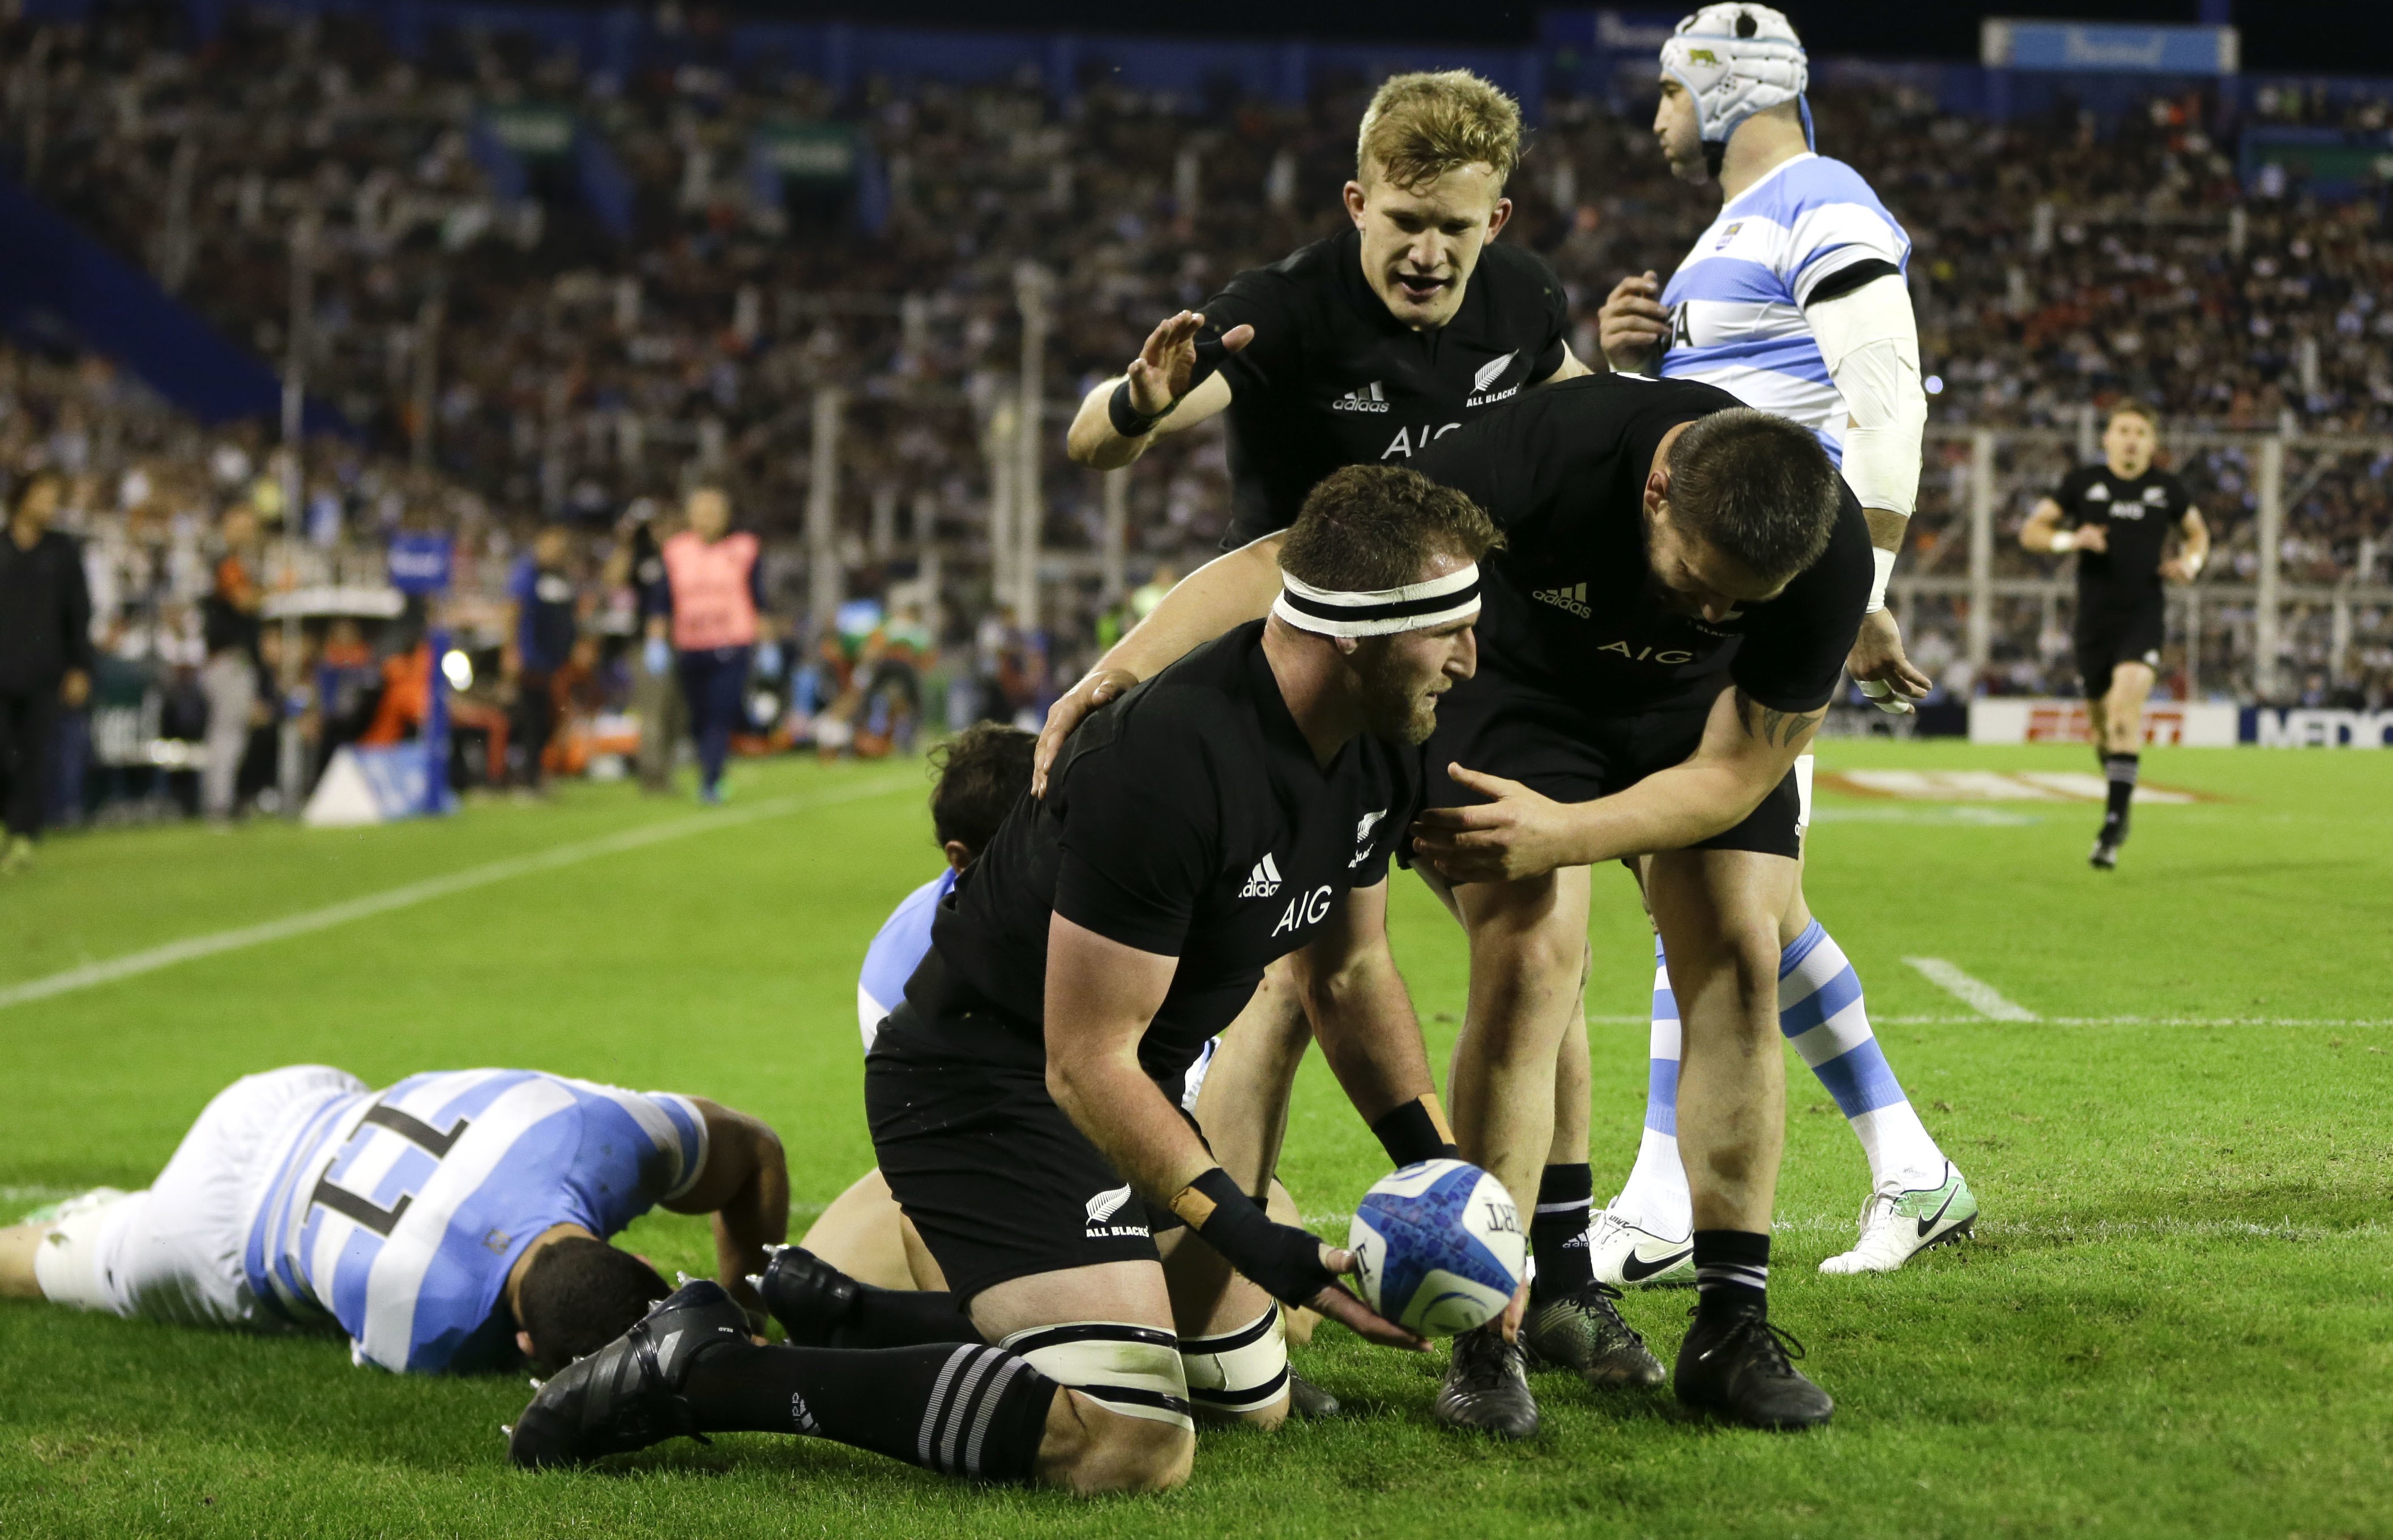 New Zealand captain Kieran Read scores one of his two tries in the victory over Argentina in Buenos Aires. Photo: AP